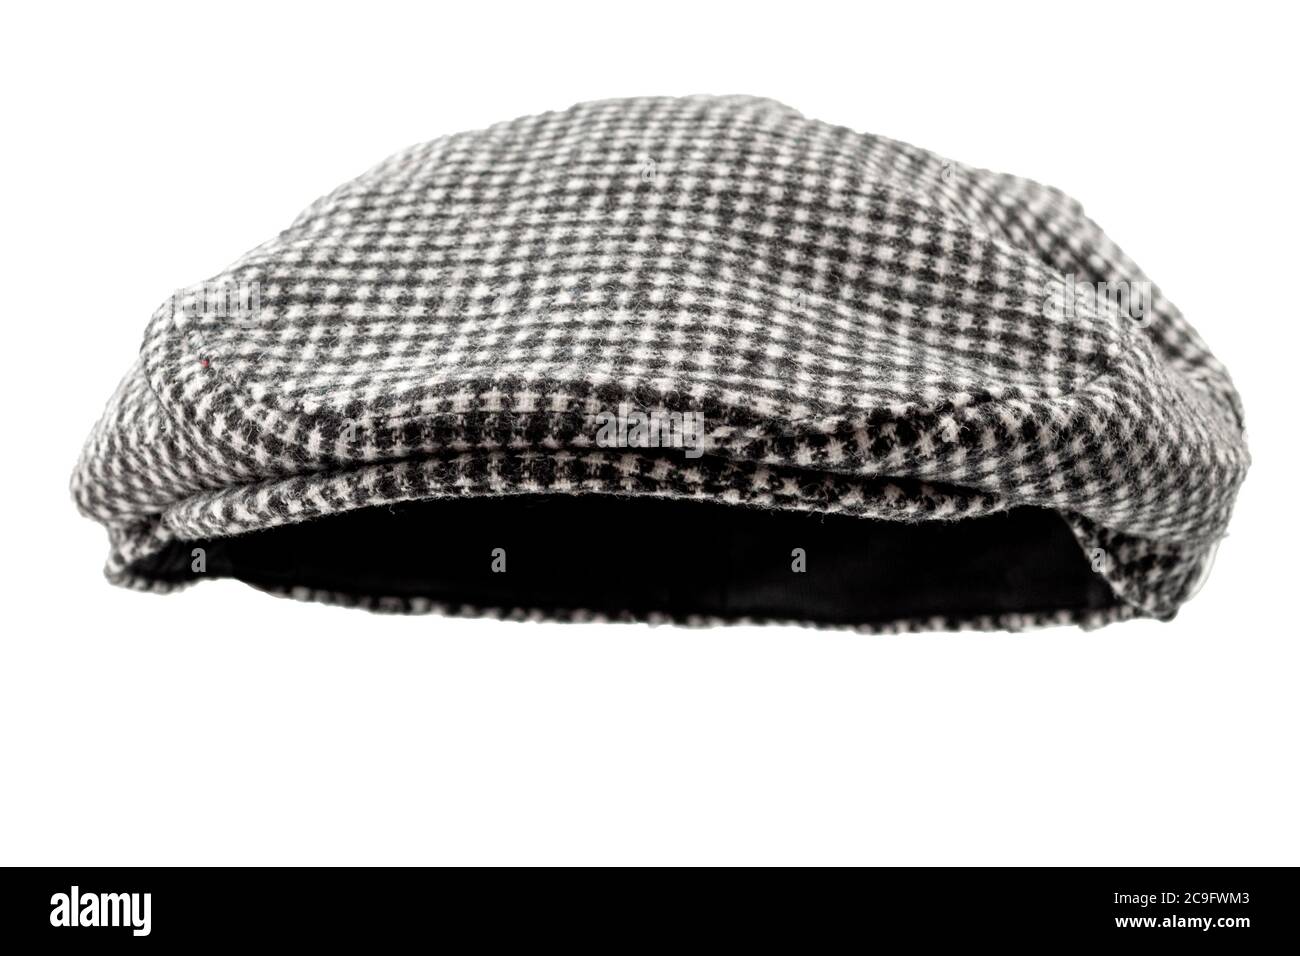 Floating grey hunting tweed flat cap or newsboy cap isolated on white background with clipping path cutout using ghost mannequin technique Stock Photo